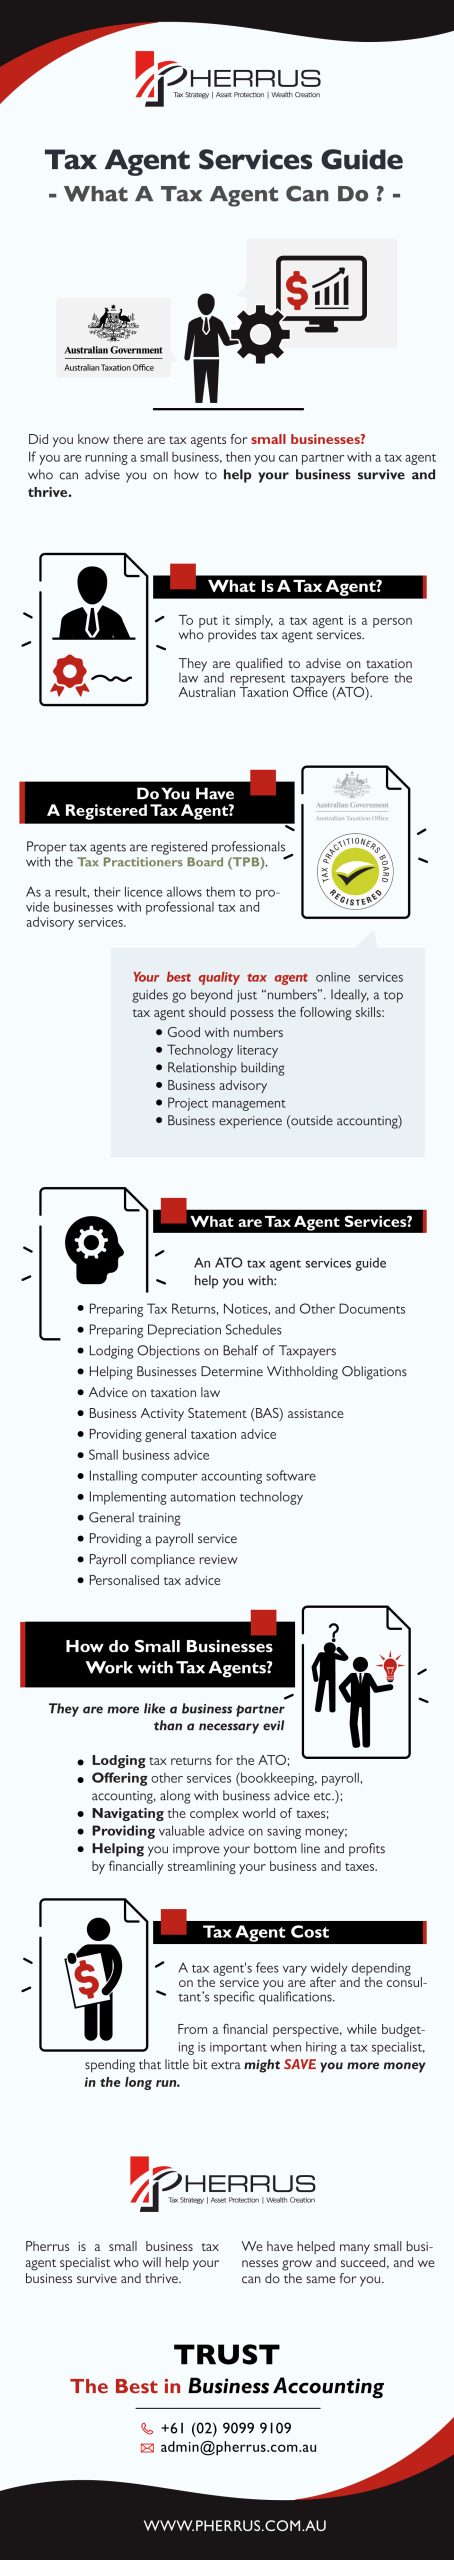 Tax agent services guide infographic